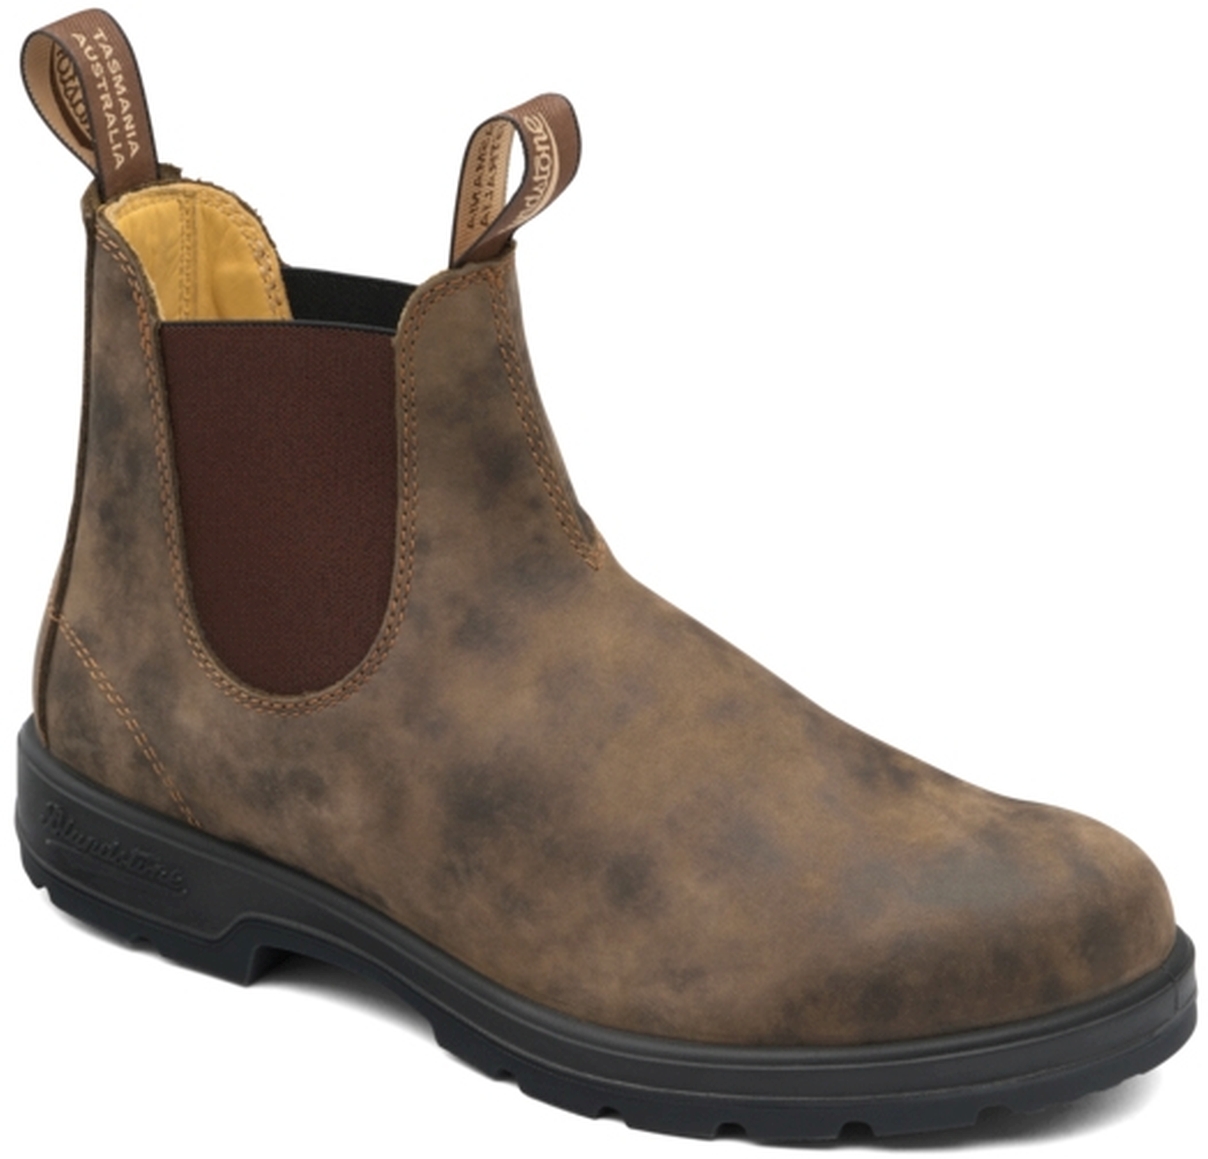 Blundstone 585 Rustic Brown Leather (550 Series) Calf leather